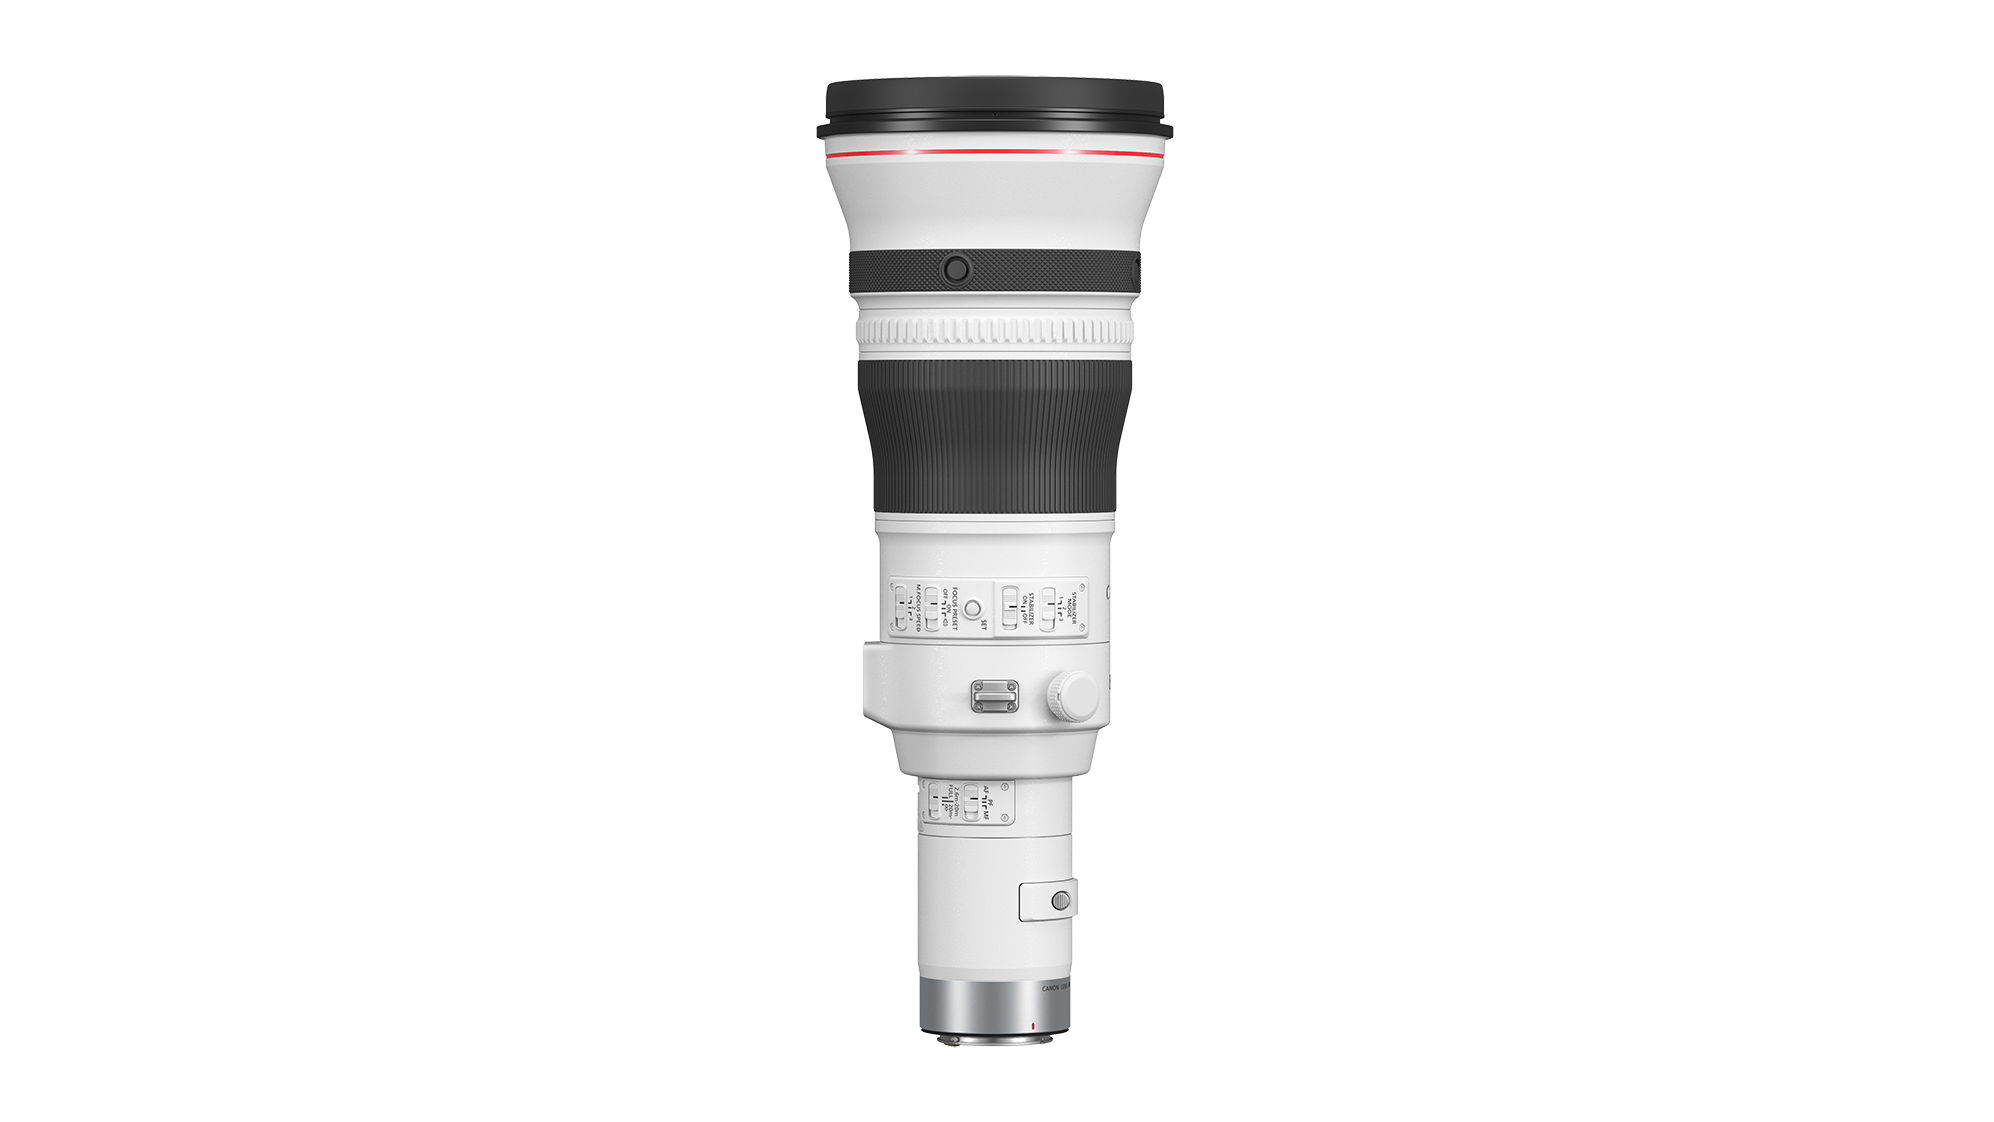 Canon RF 800mm f/5.6 L IS USM